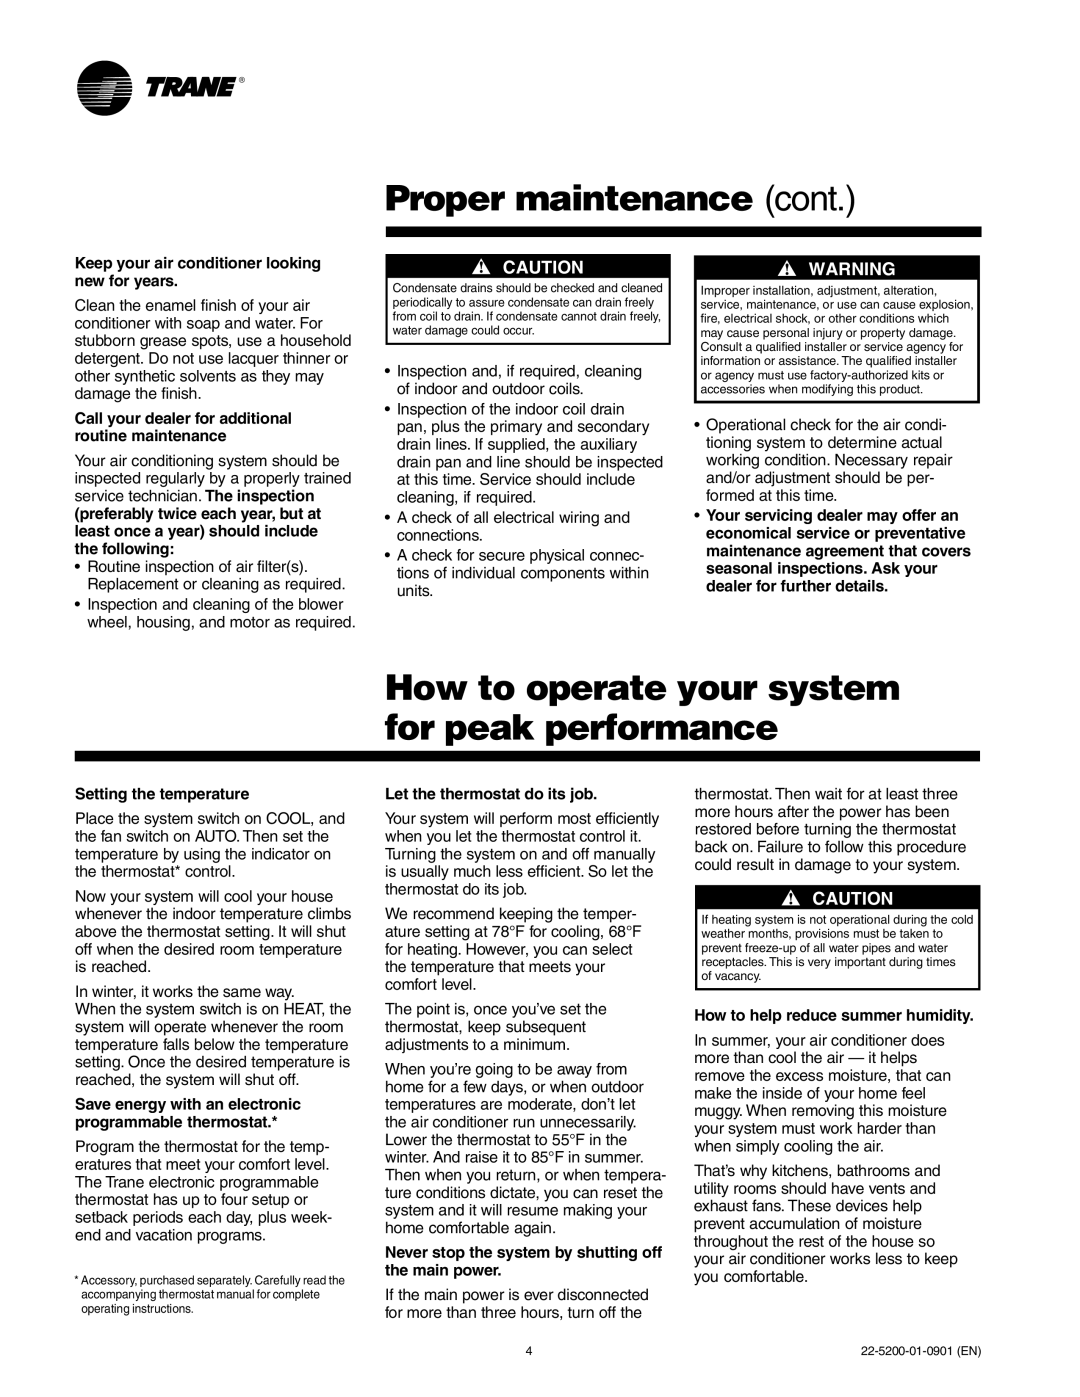 Trane 22-5200-01-0901 (EN) manual Proper maintenance cont, How to operate your system for peak performance 